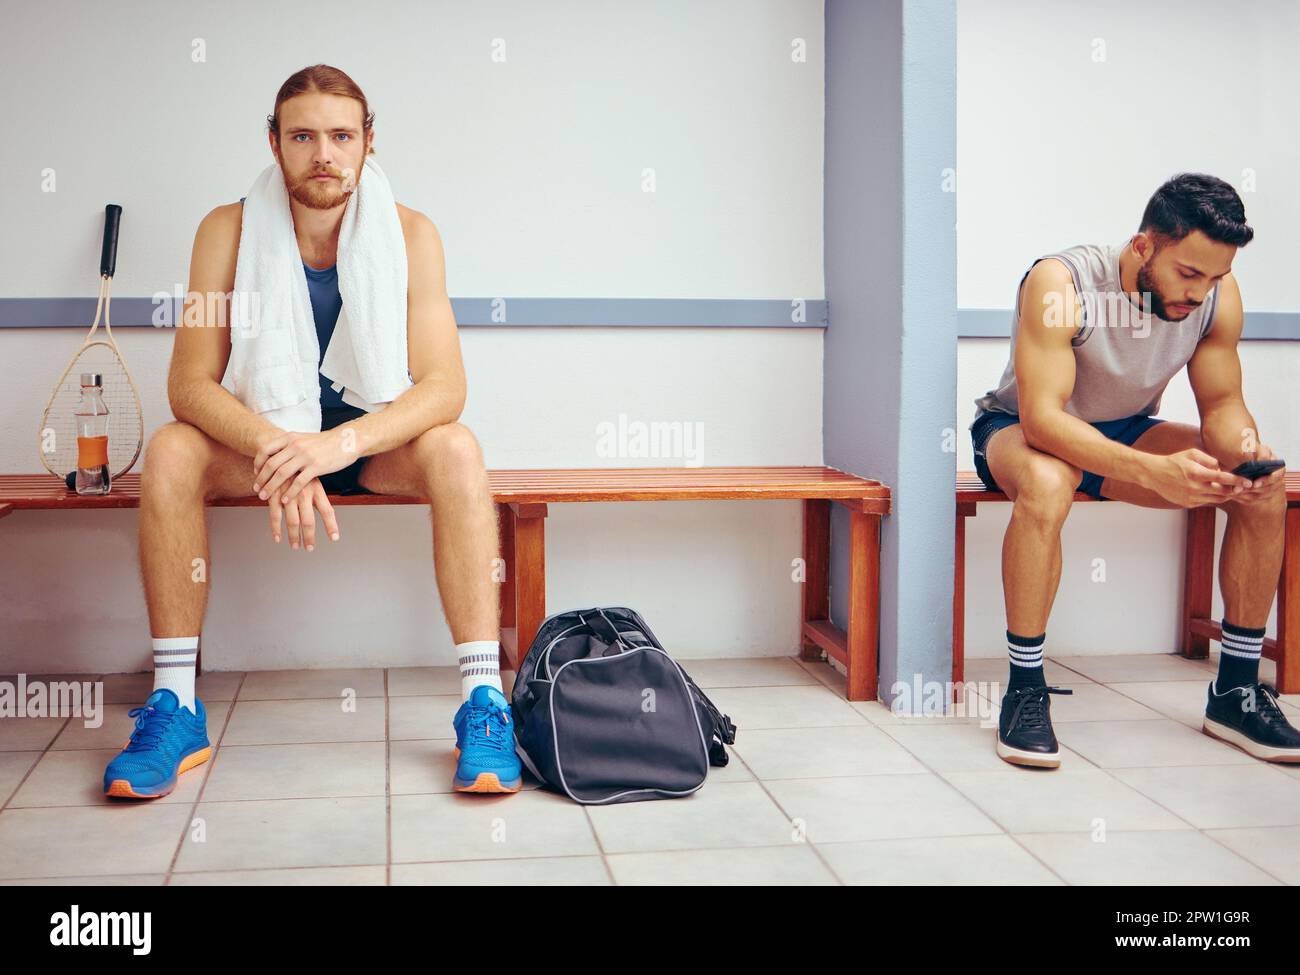 Portrait of a caucasian athlete sitting in a locker room. Two men sitting in a gym locker room together. Serious player relaxing in a gym together. Pr Stock Photo